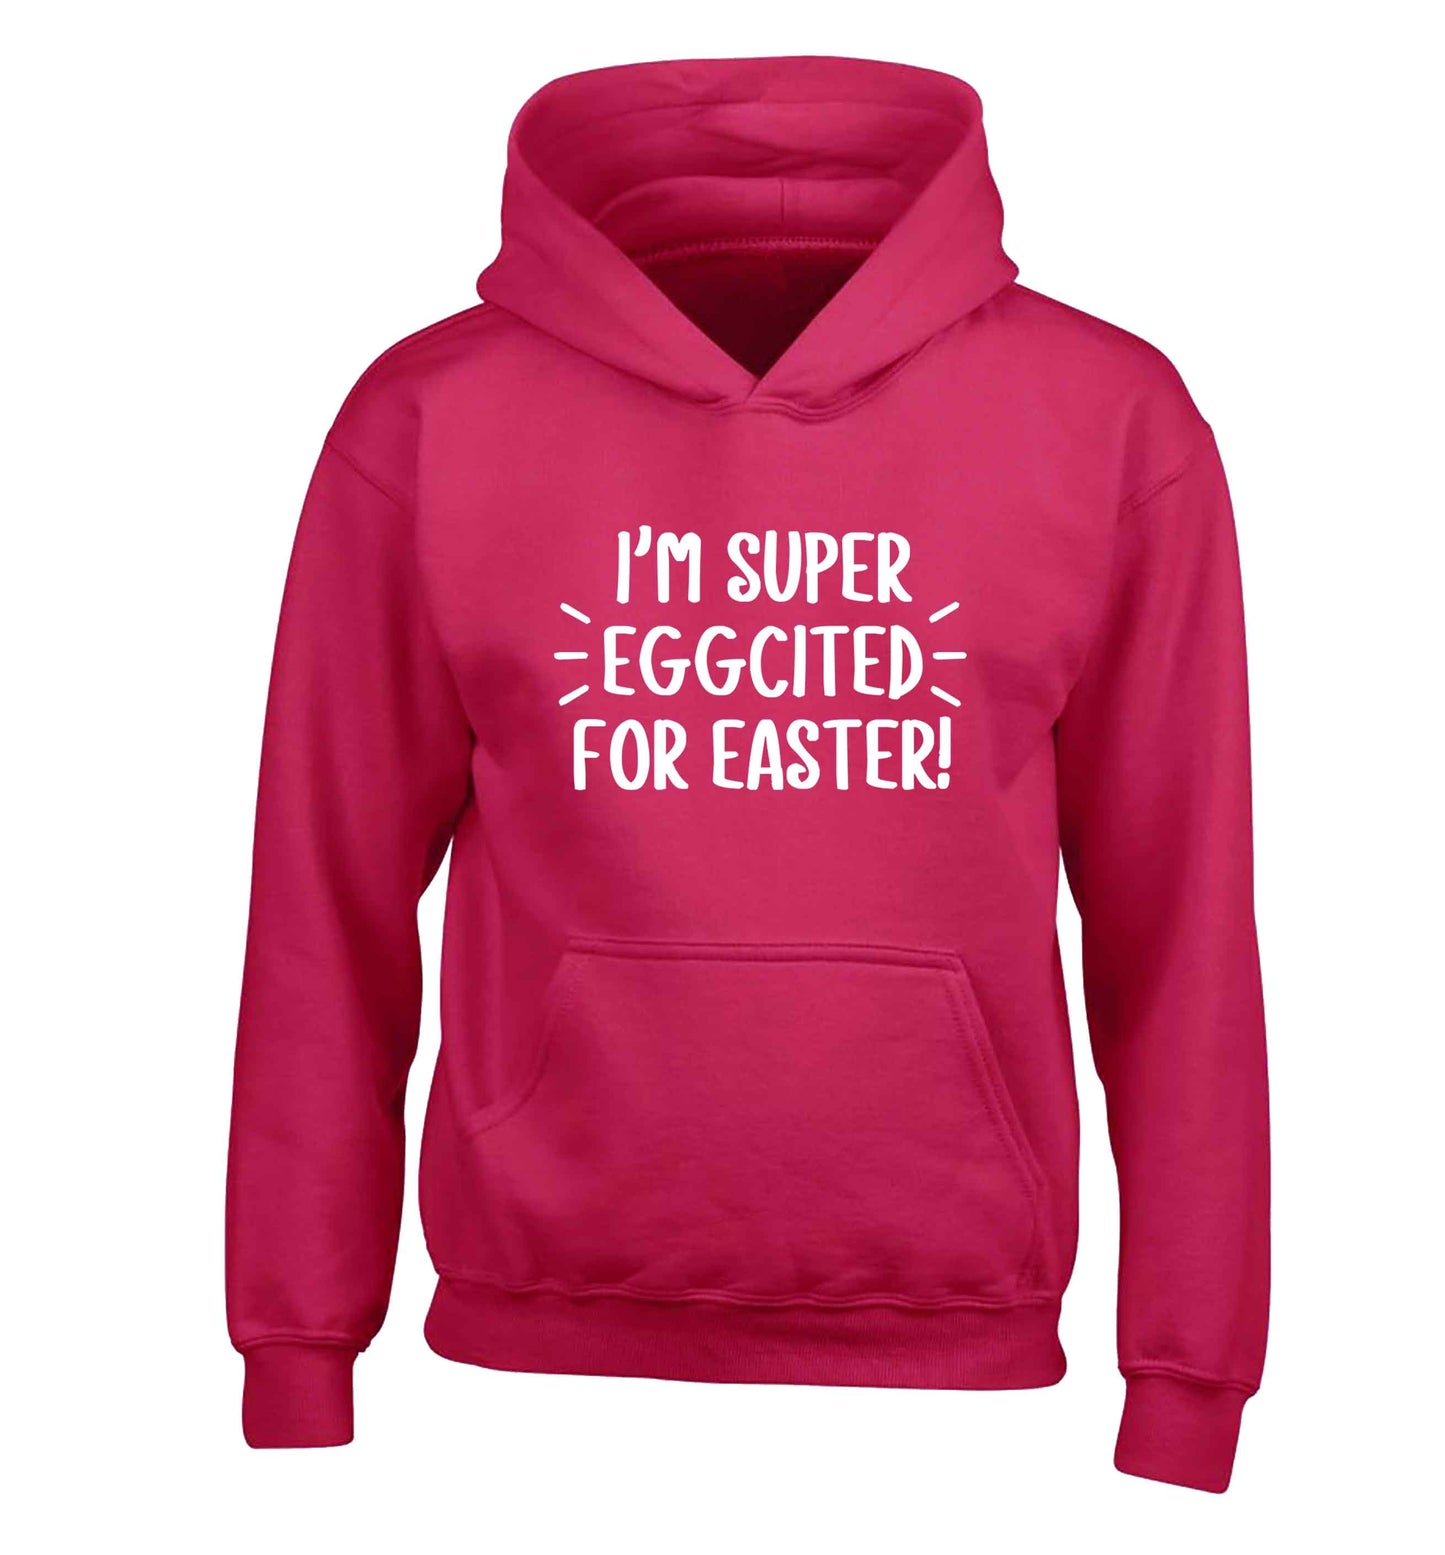 I'm super eggcited for Easter children's pink hoodie 12-13 Years